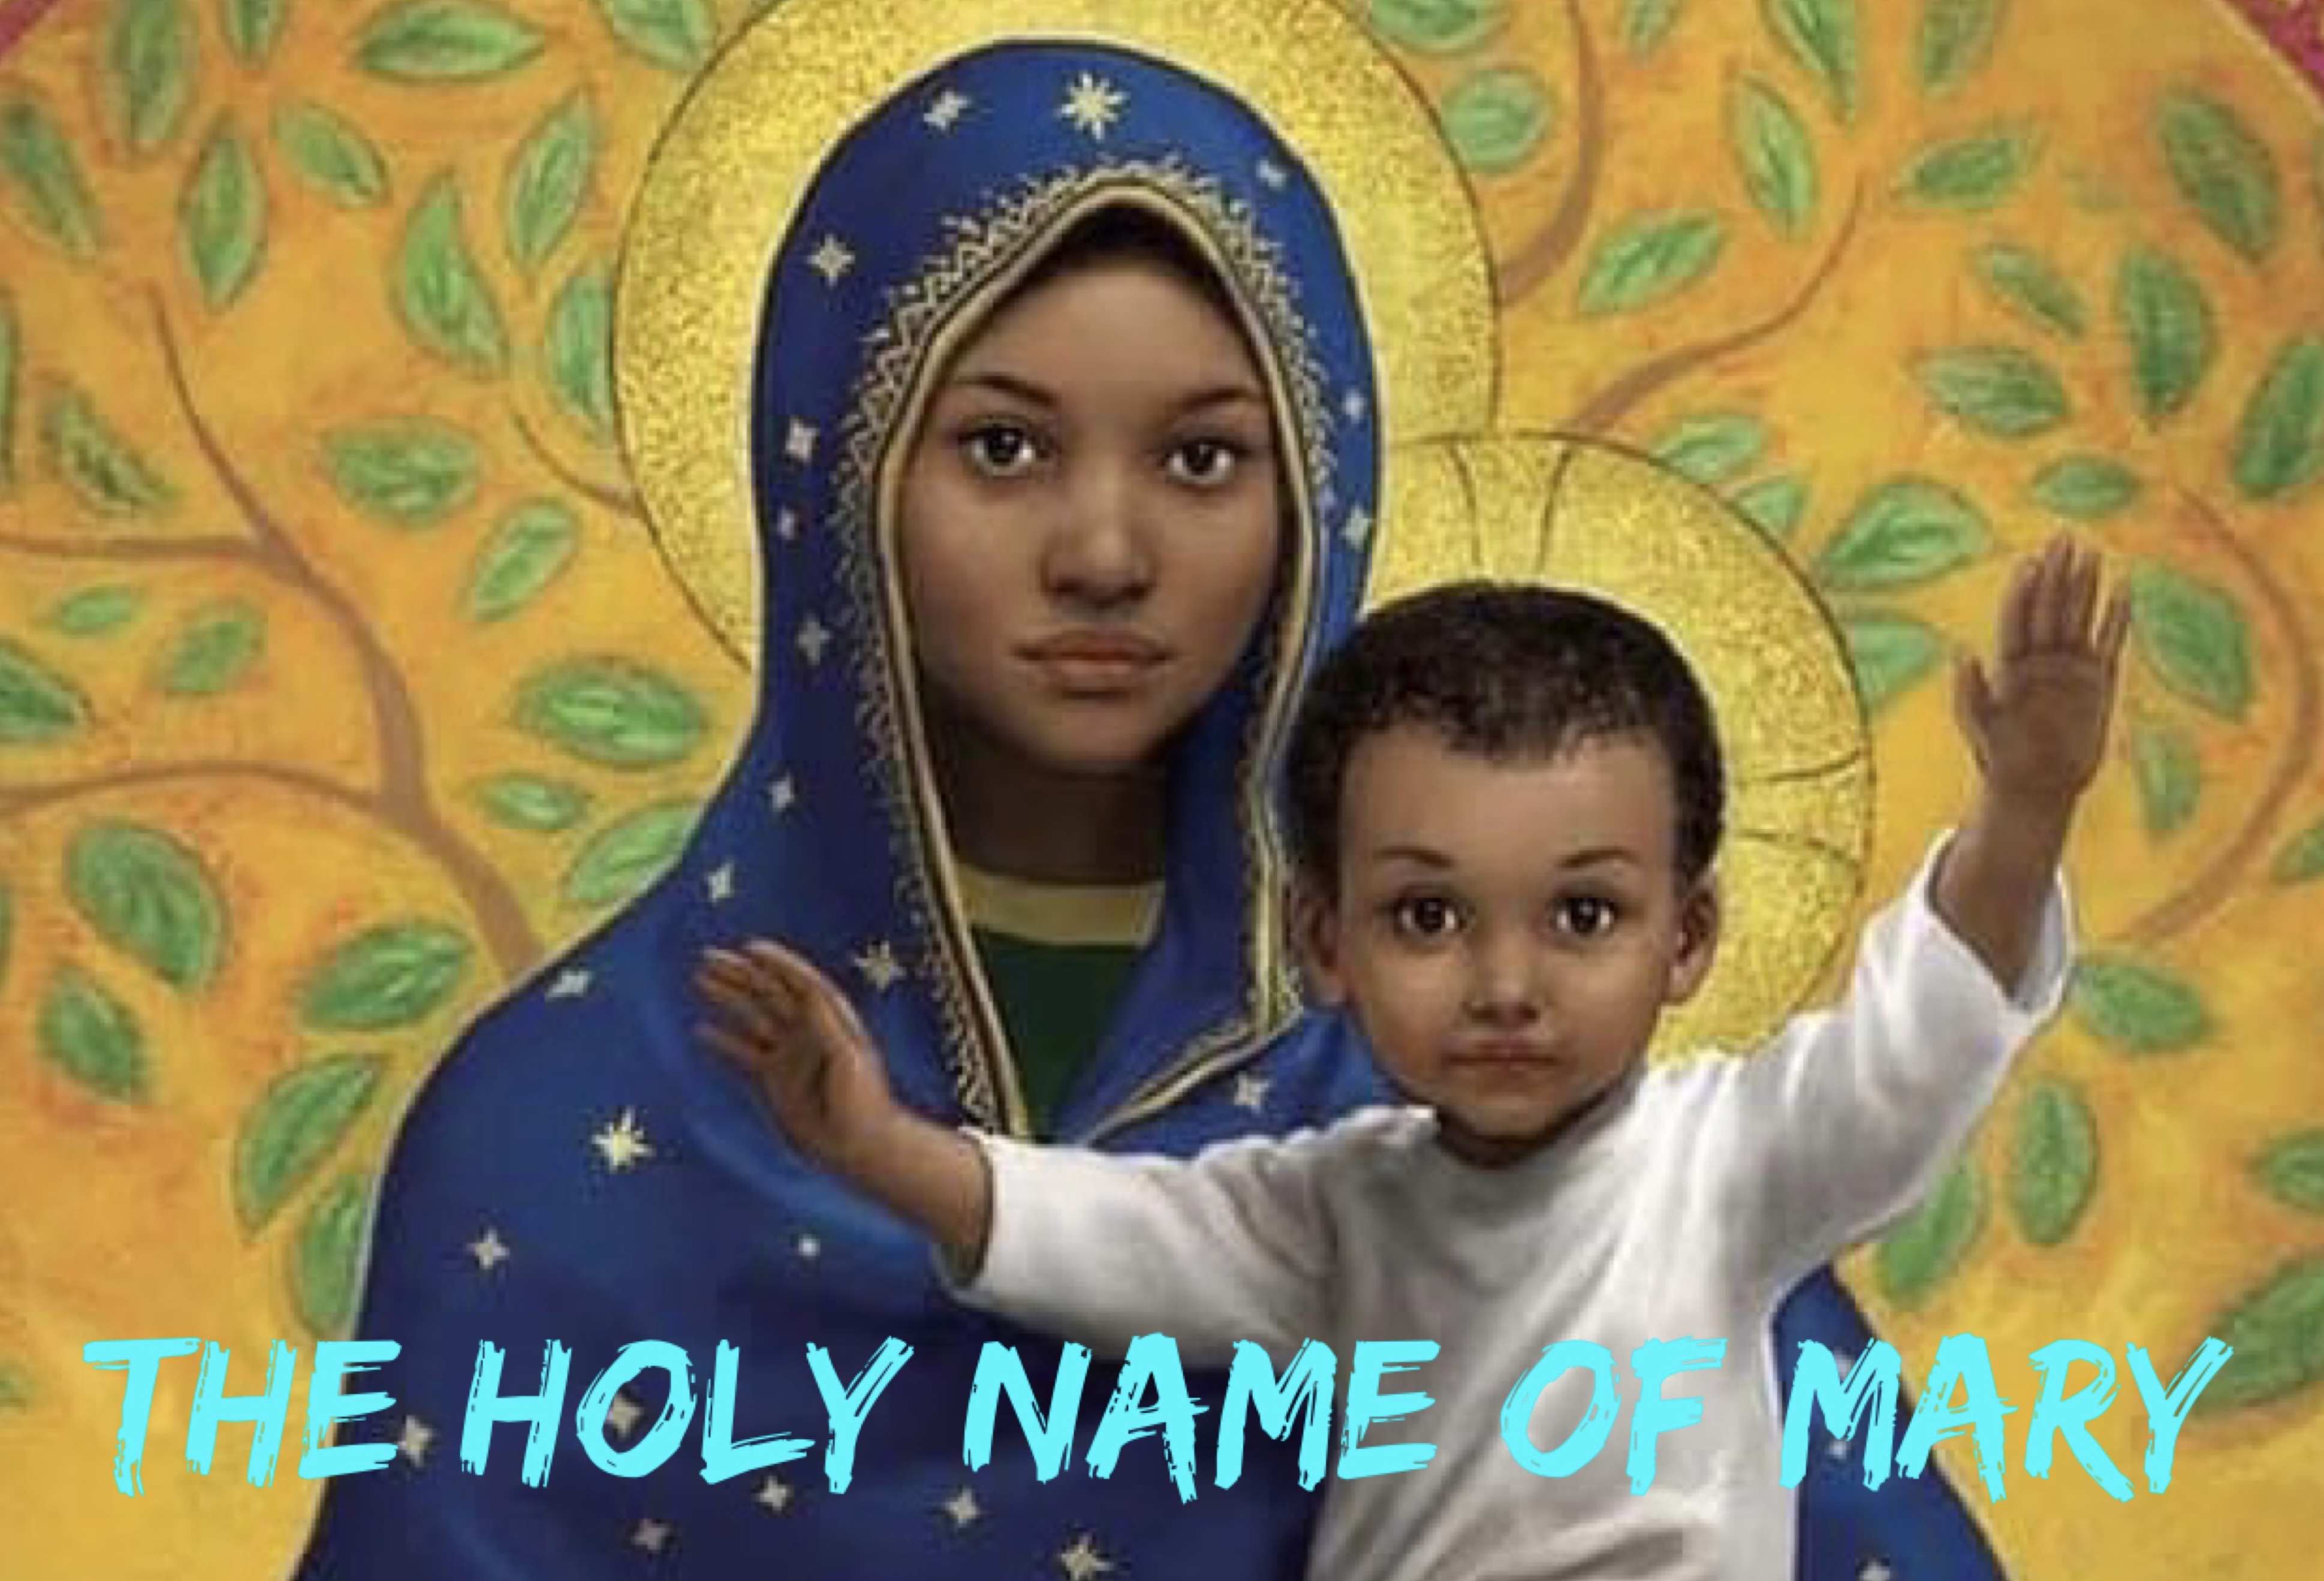 12th September – The Holy Name of Mary